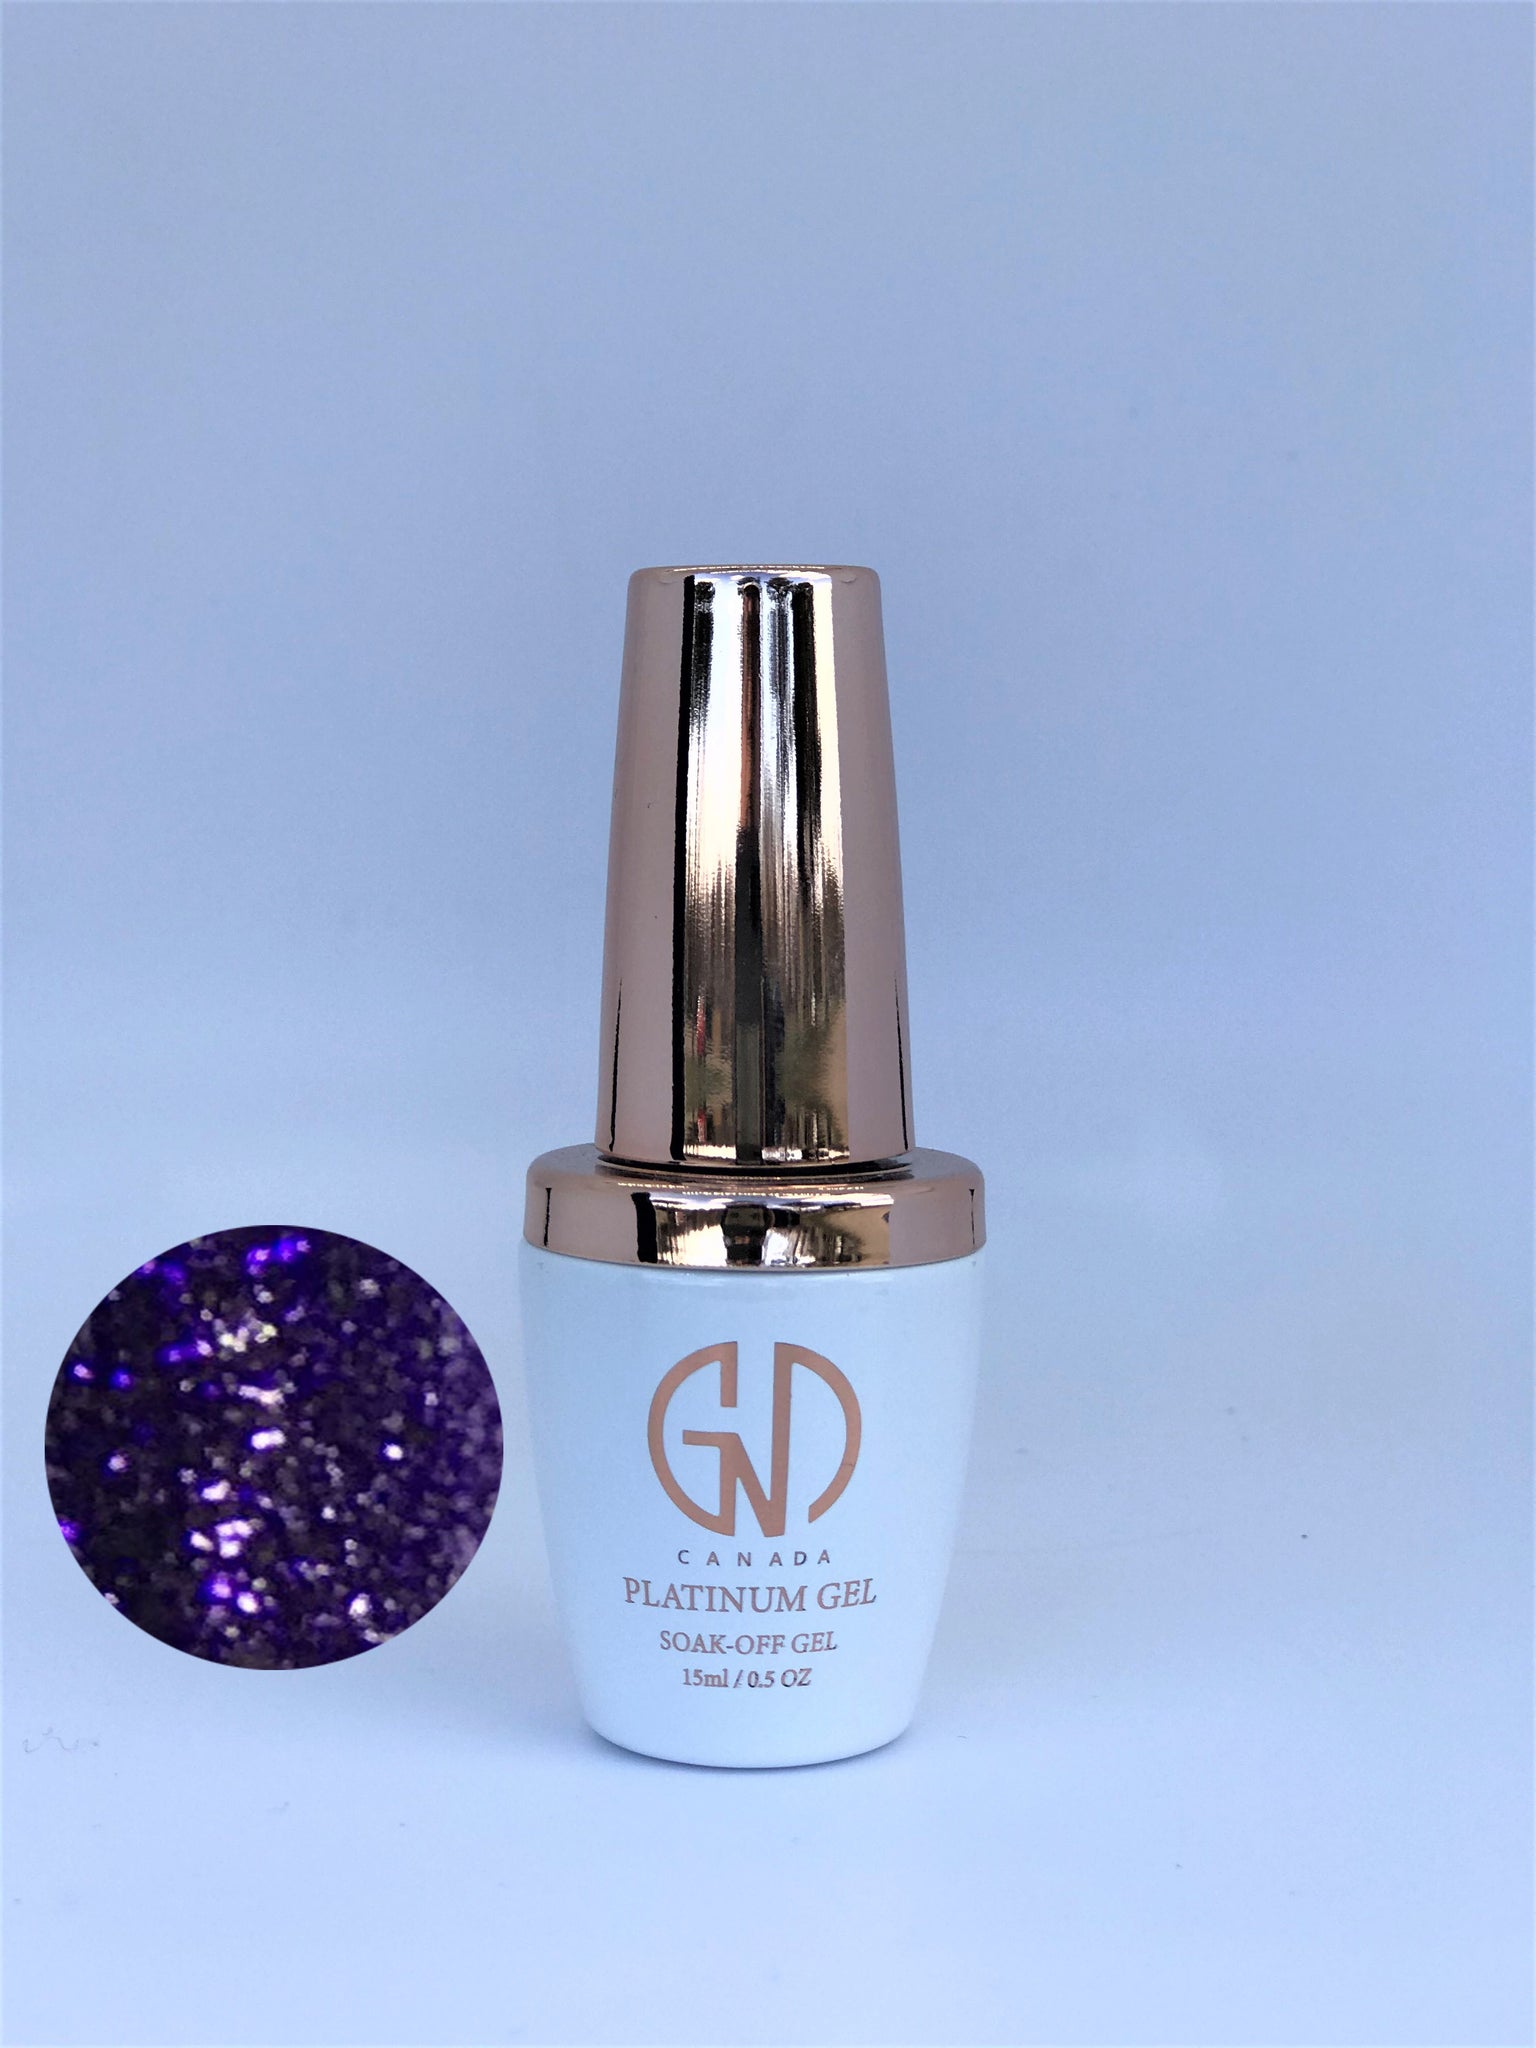 GND Platinum Gel #9 | GND Canada® - CM Nails & Beauty Supply